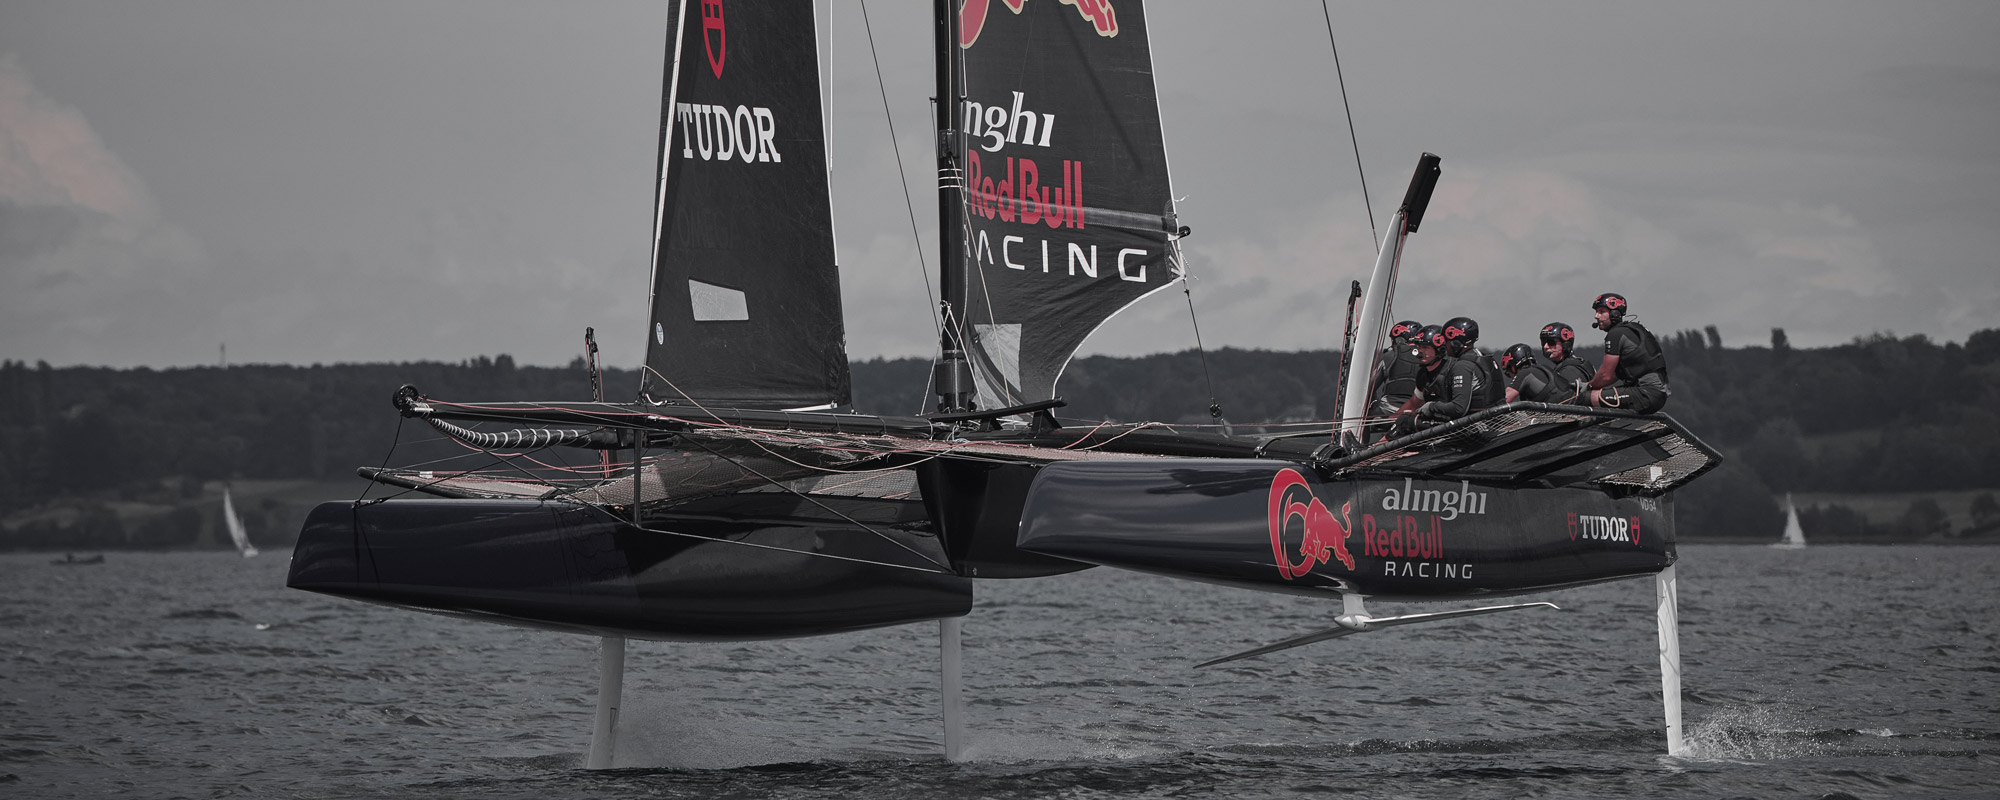 Battle of the Best: The Watches of the America's Cup